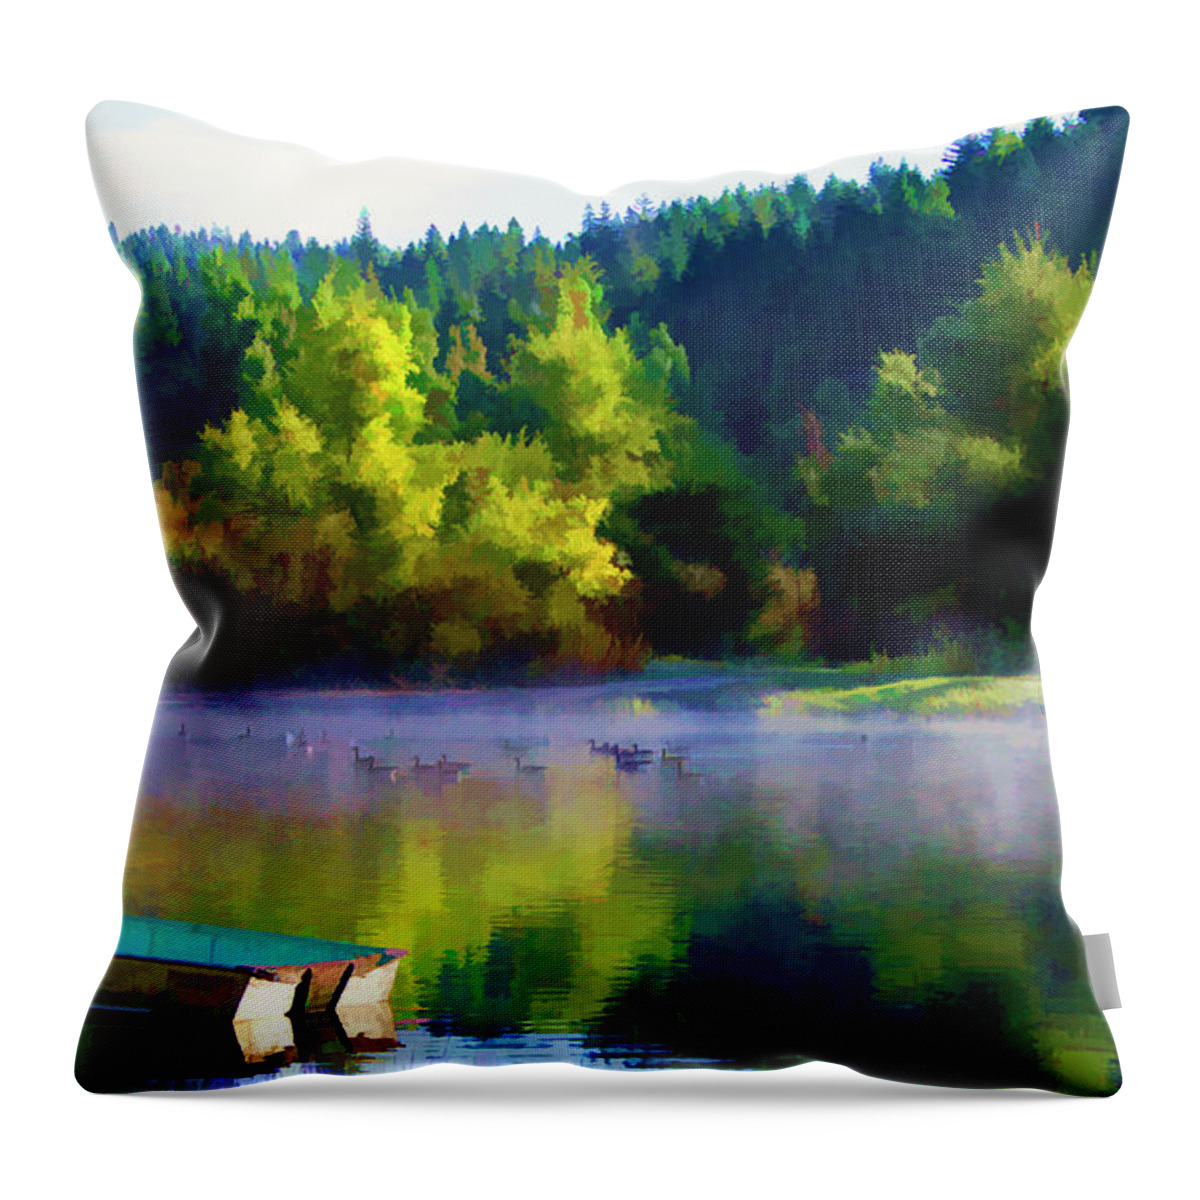 Landscape Throw Pillow featuring the photograph Vibrant Color Pond Boat Geese by Chuck Kuhn